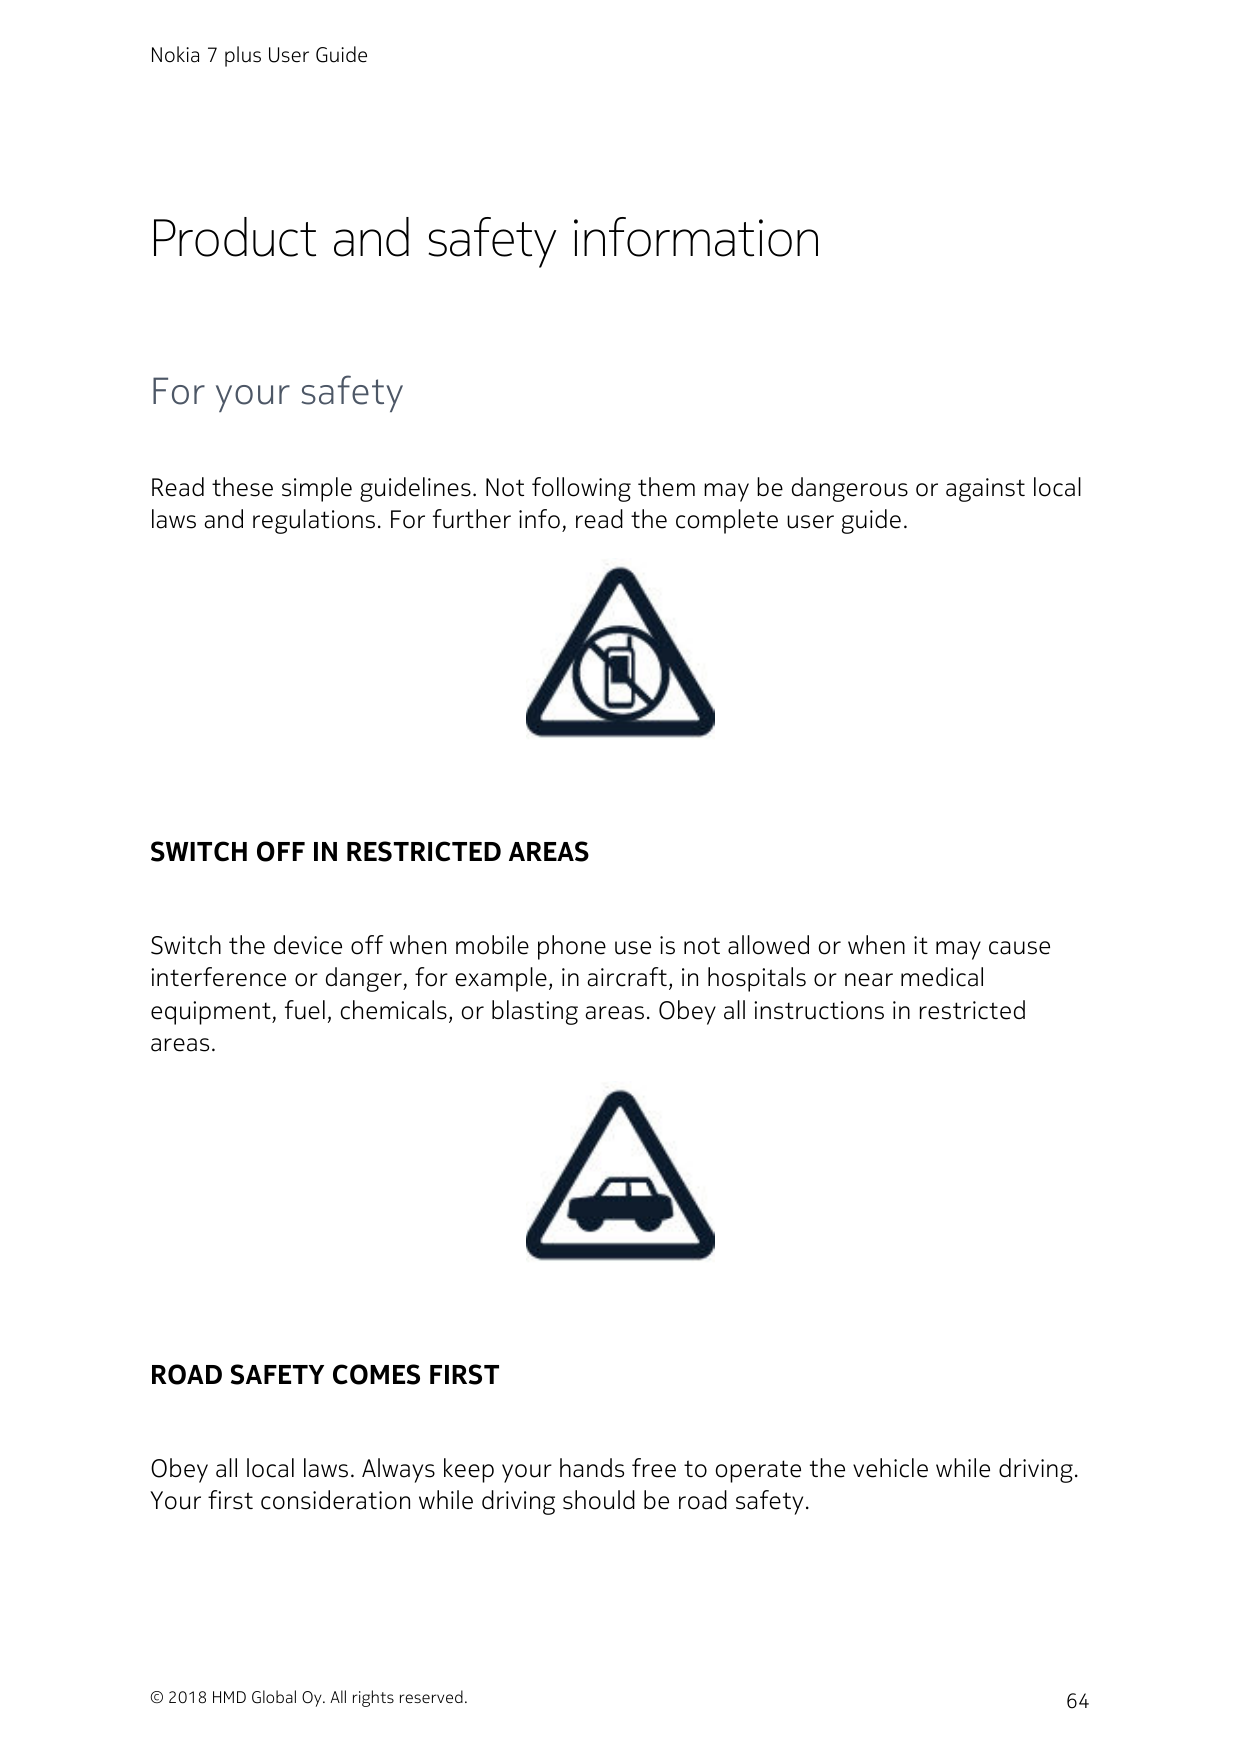 Nokia 7 plus User GuideProduct and safety informationFor your safetyRead these simple guidelines. Not following them may be dang